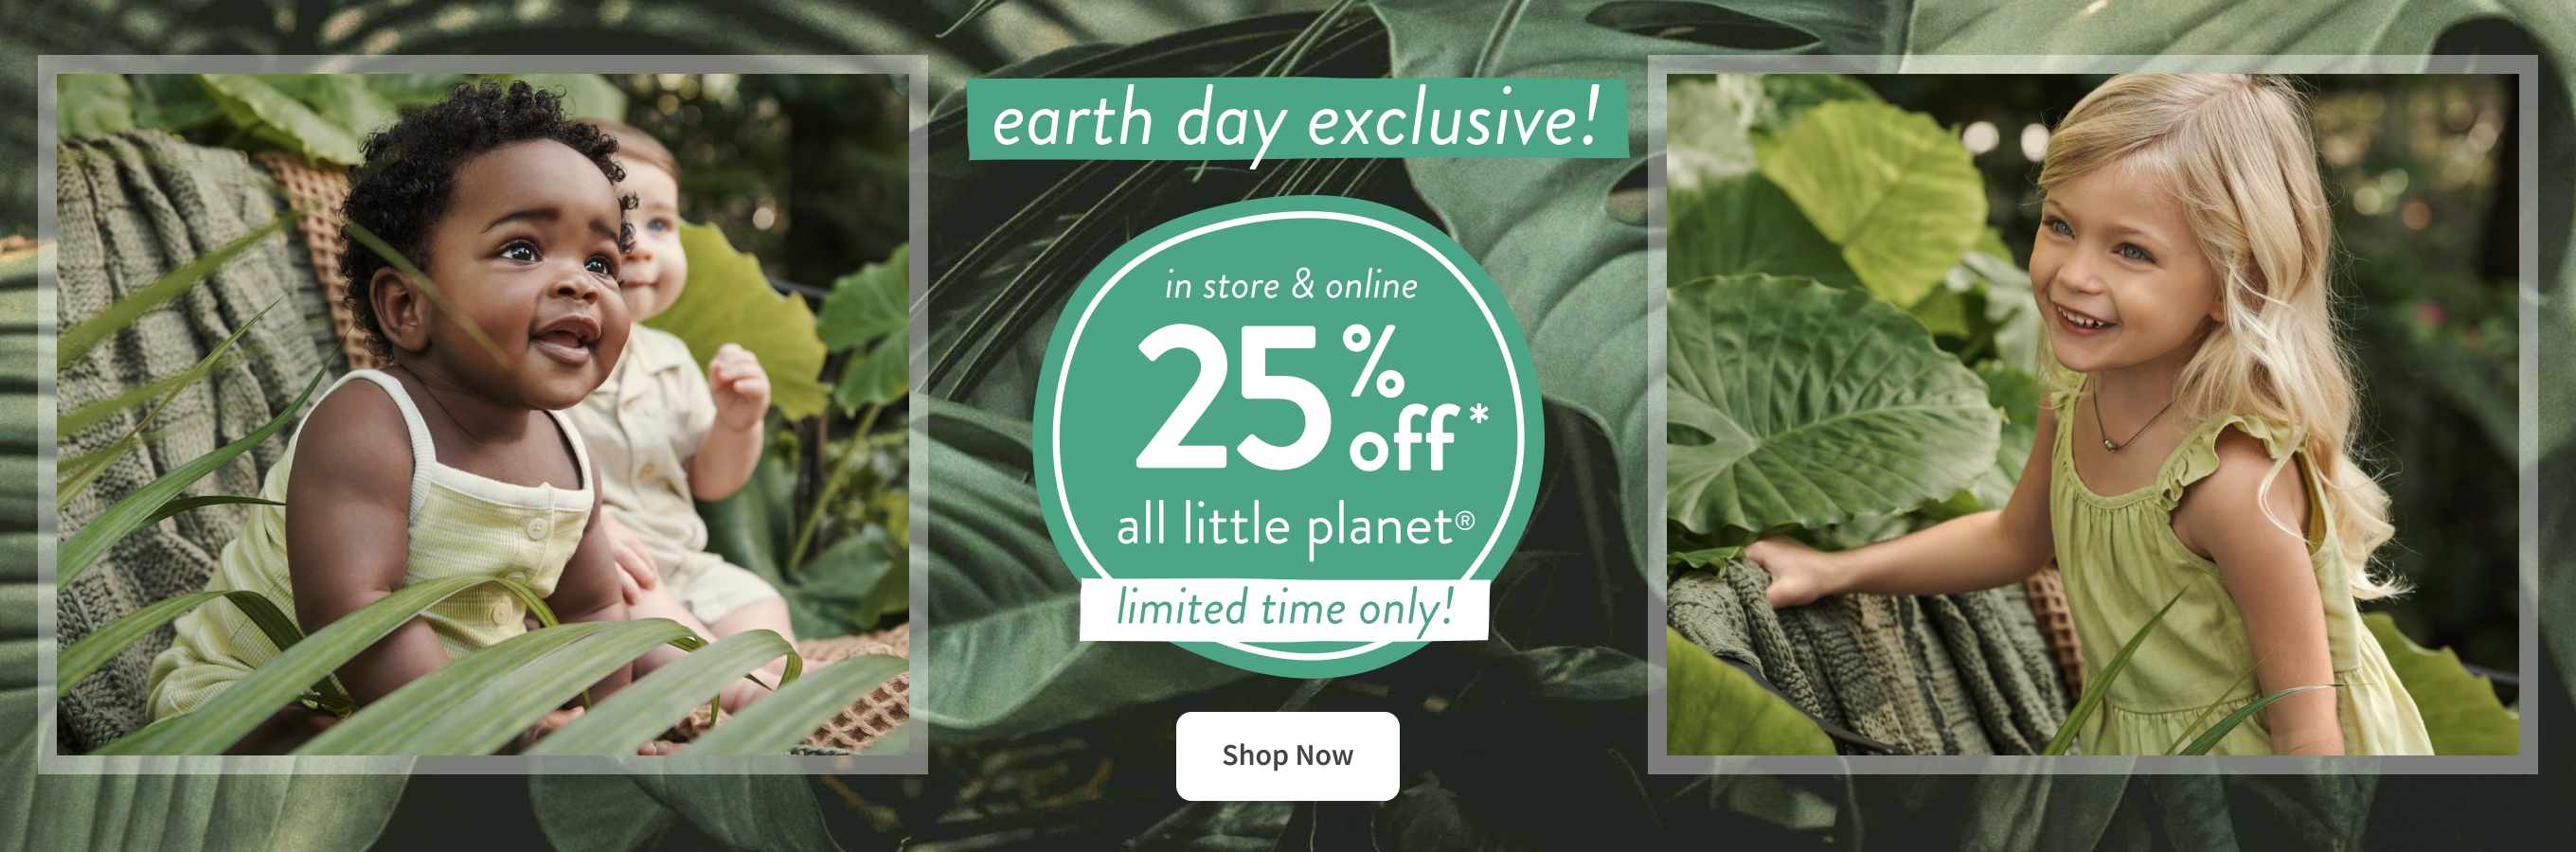 earth day exclusive! in store&online|25% off* all little planet|limited time only! | shop Now